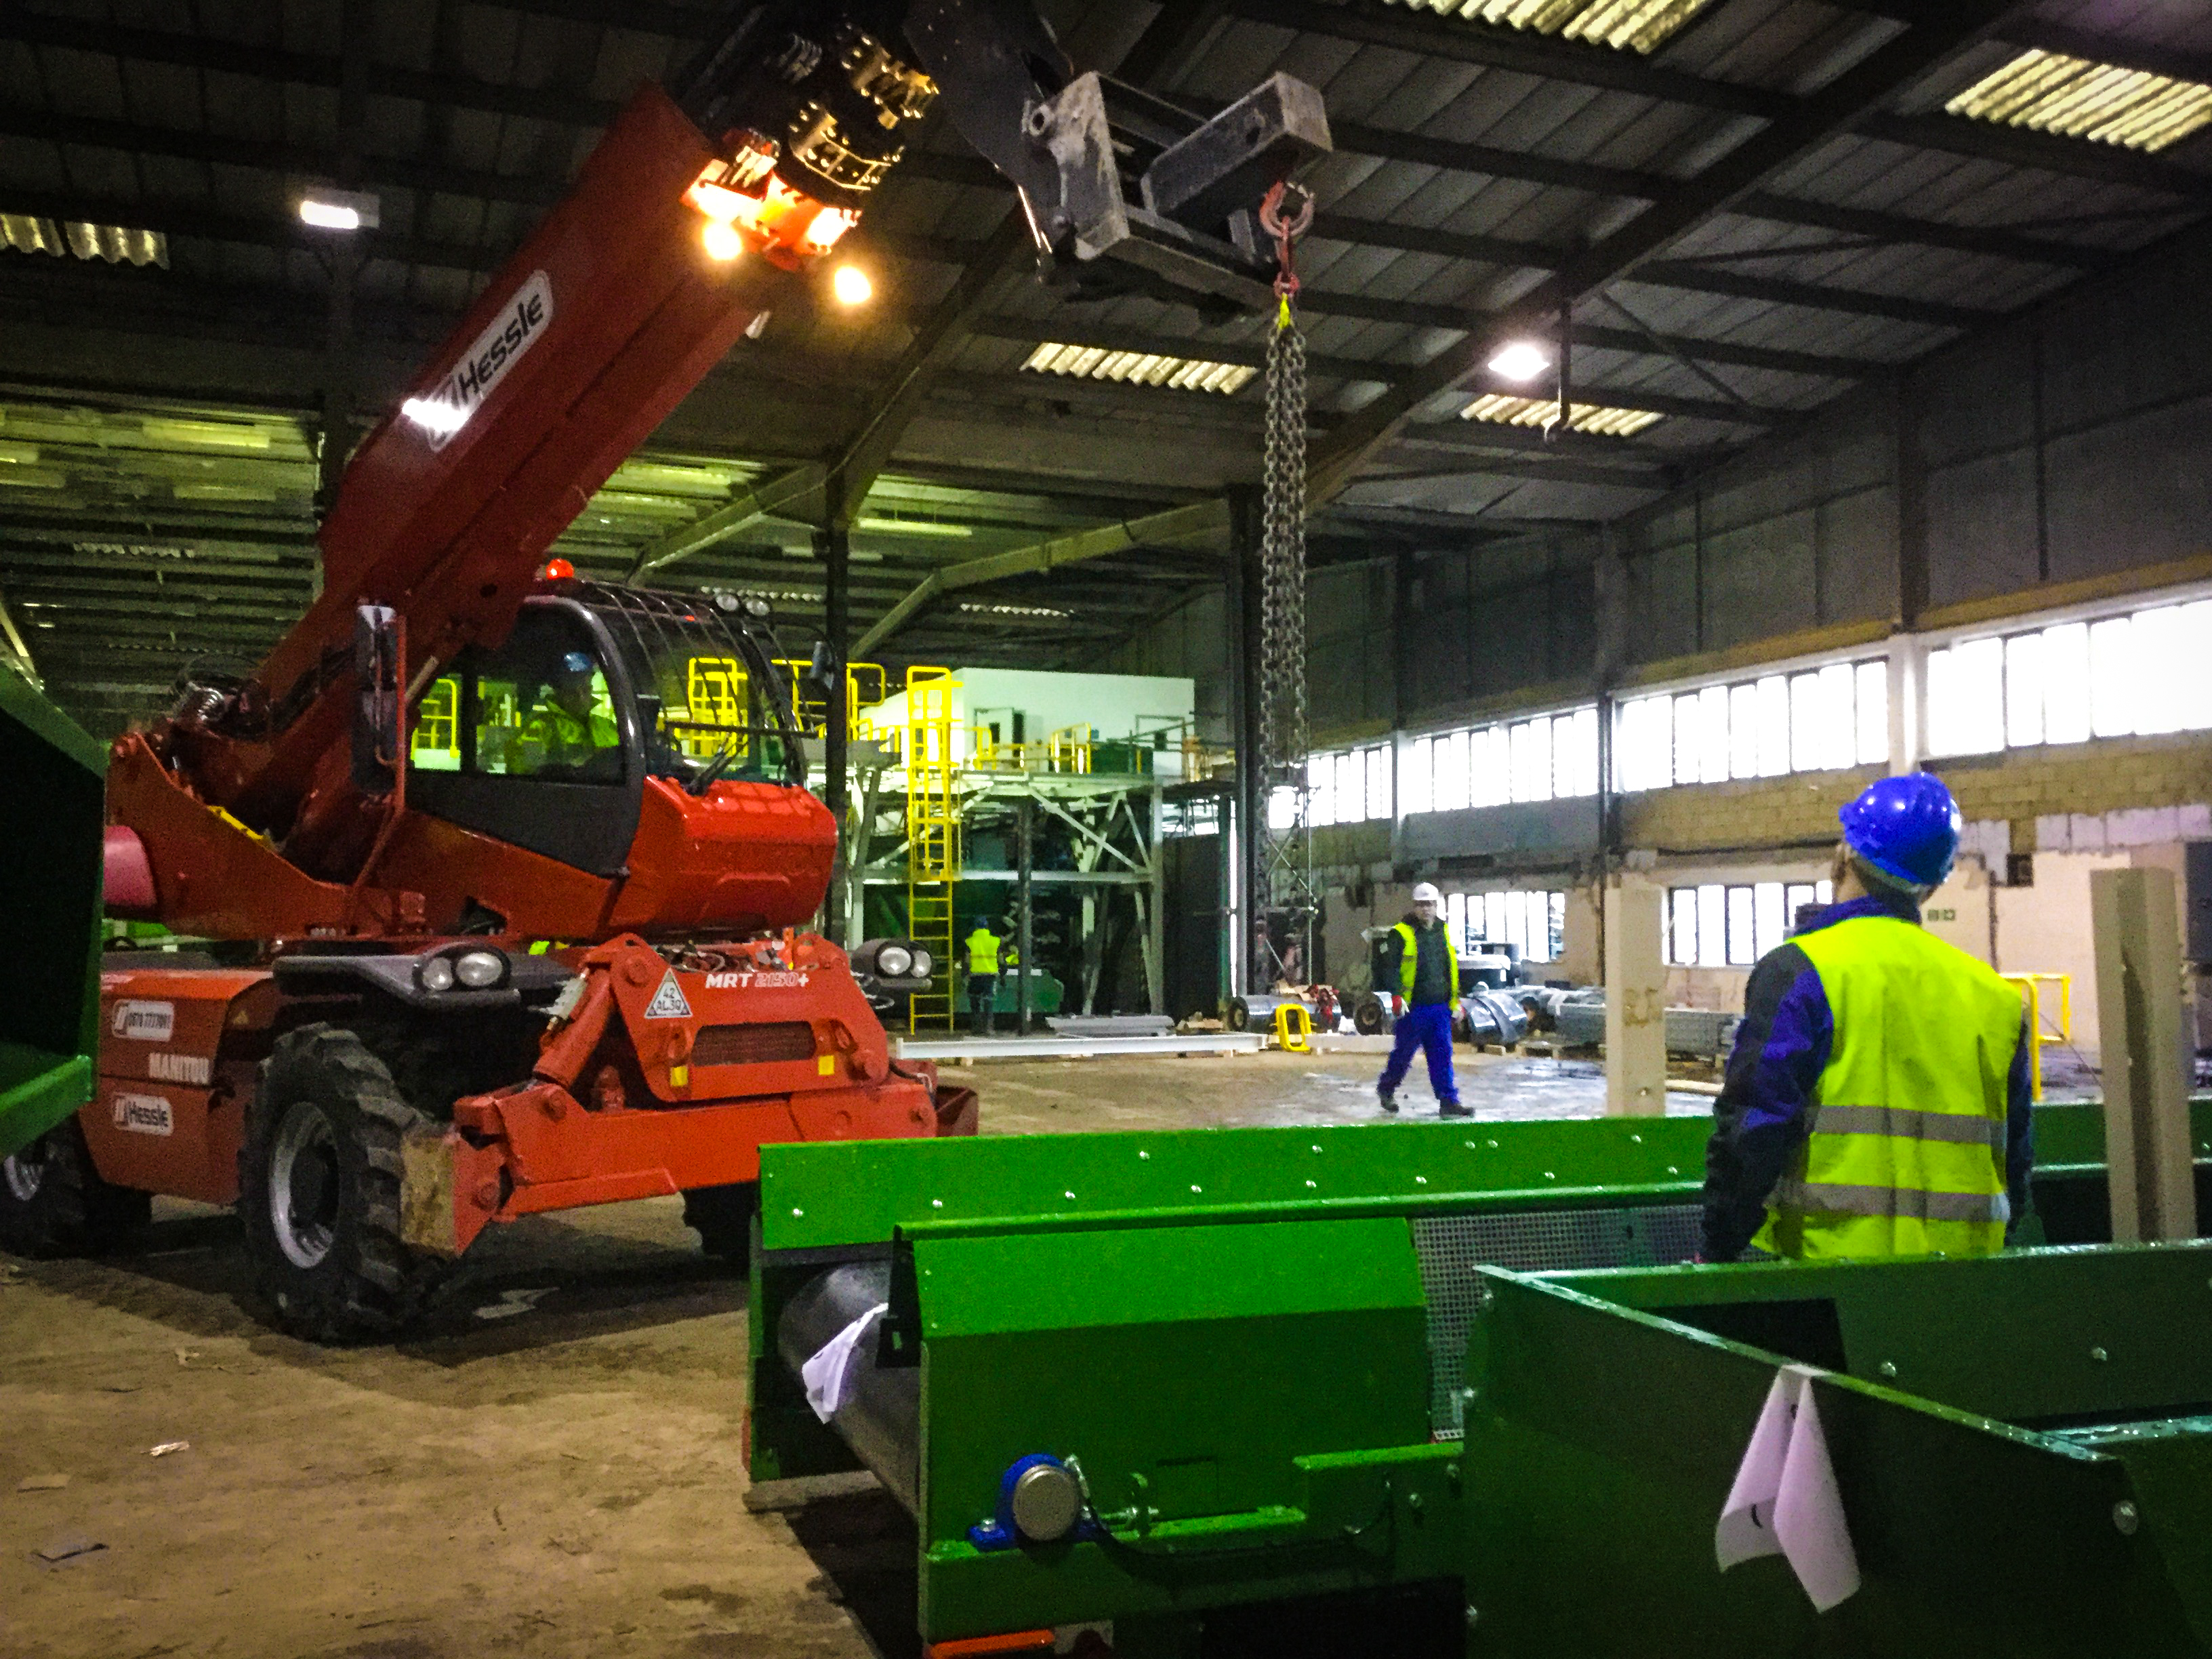 New materials recovery facility for Stourton